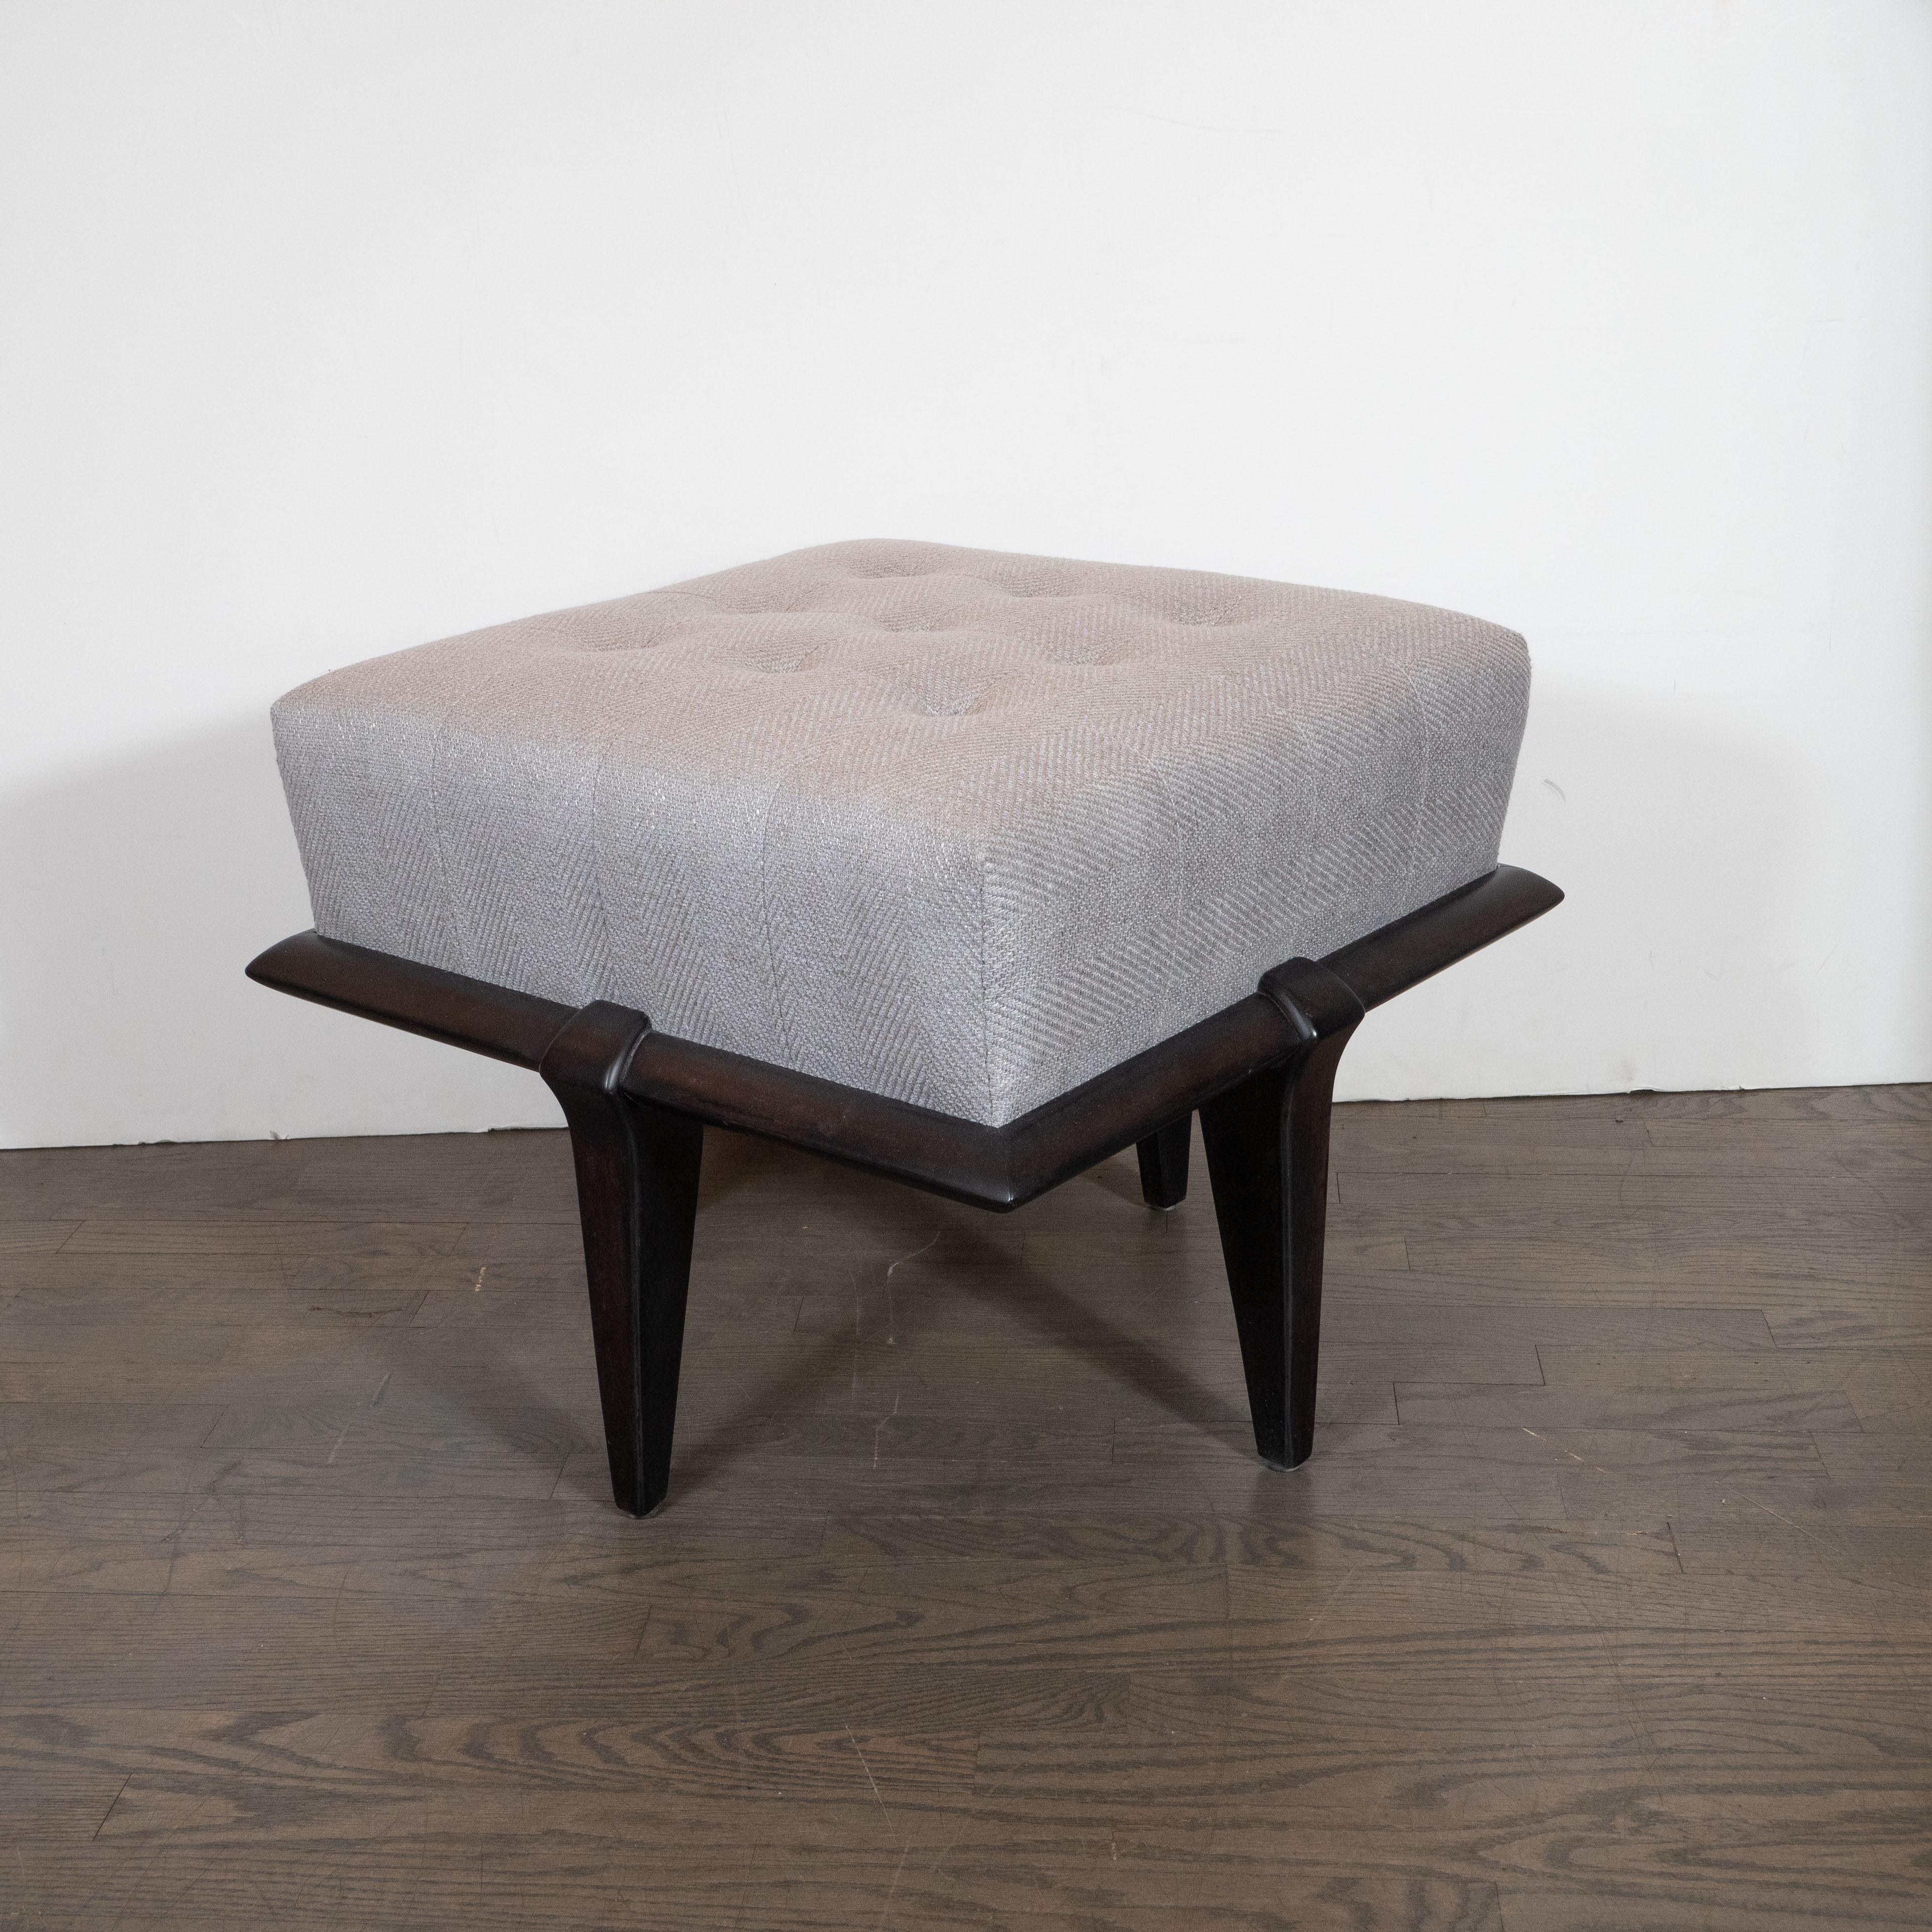 American Mid-Century Modern Ebonized Walnut and Dove Gray Button Tufted Ottoman For Sale